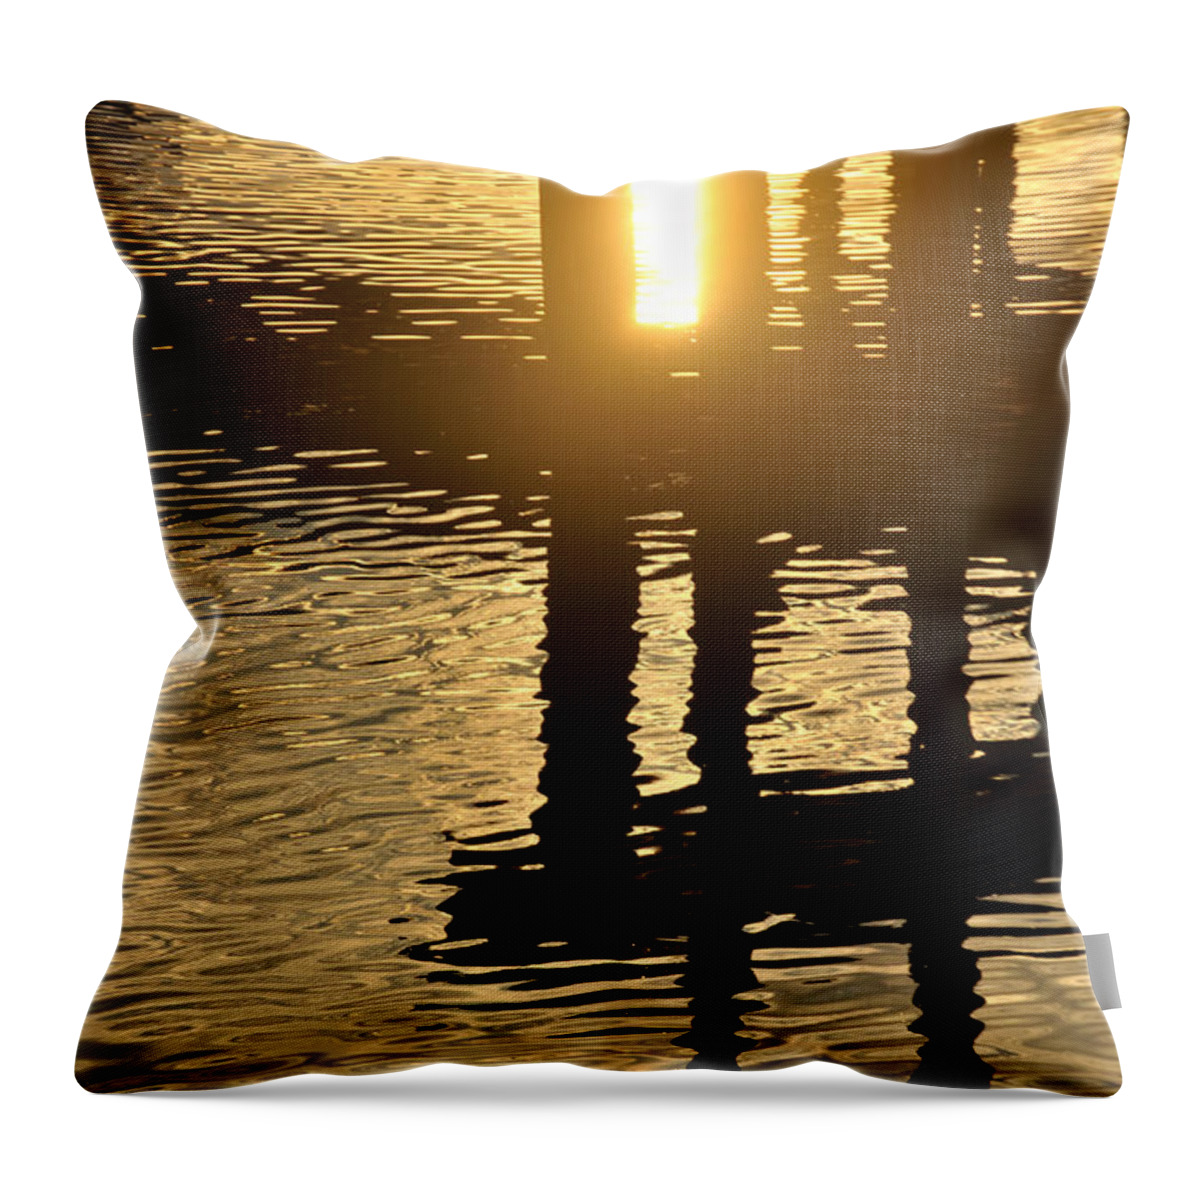 Sunrise Throw Pillow featuring the photograph Golden Ripples v1 by Michael Frank Jr